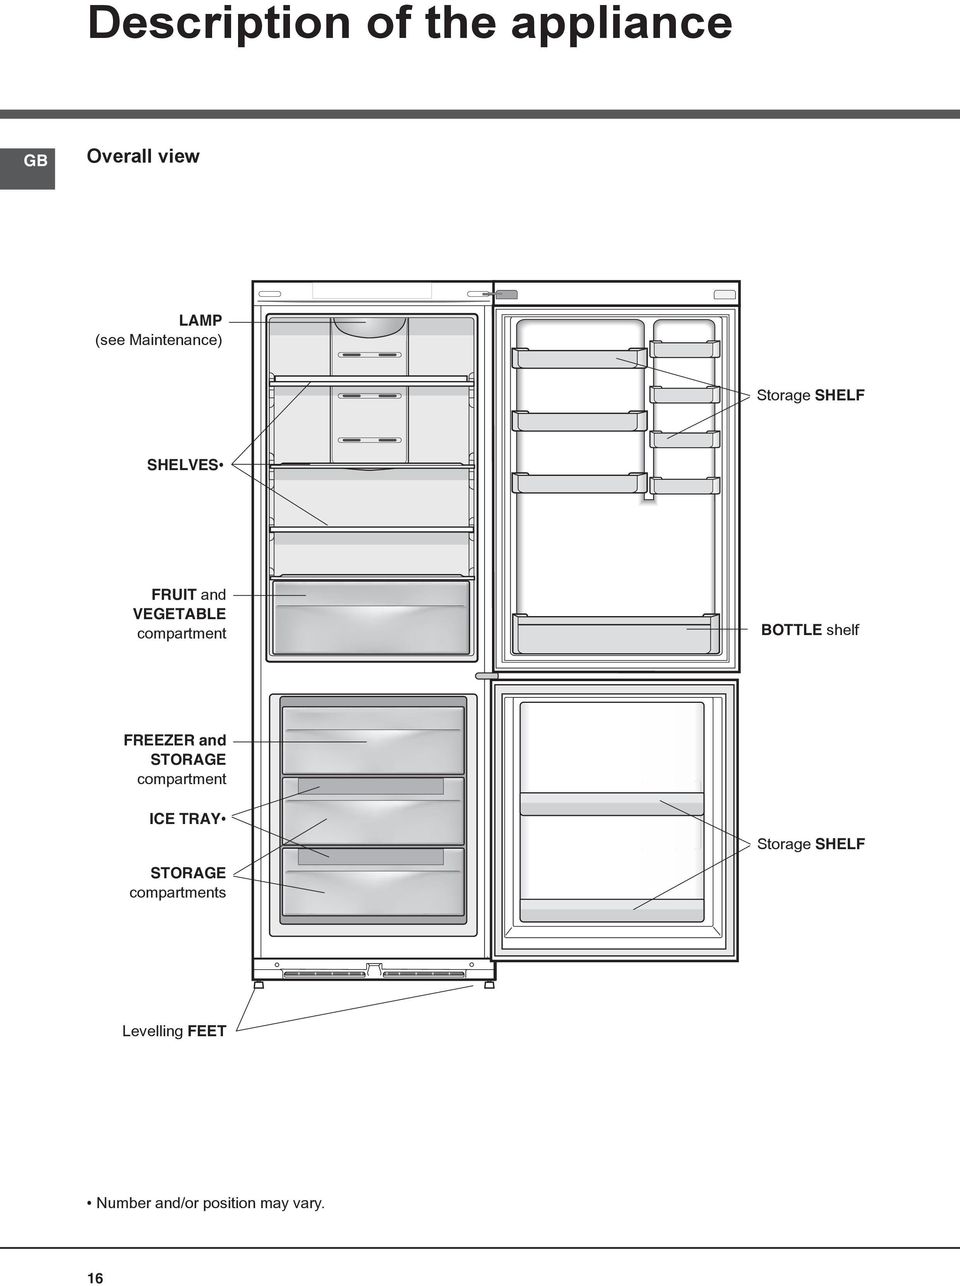 compartment BOTTLE shelf FREEZER and STORAGE compartment ICE AY